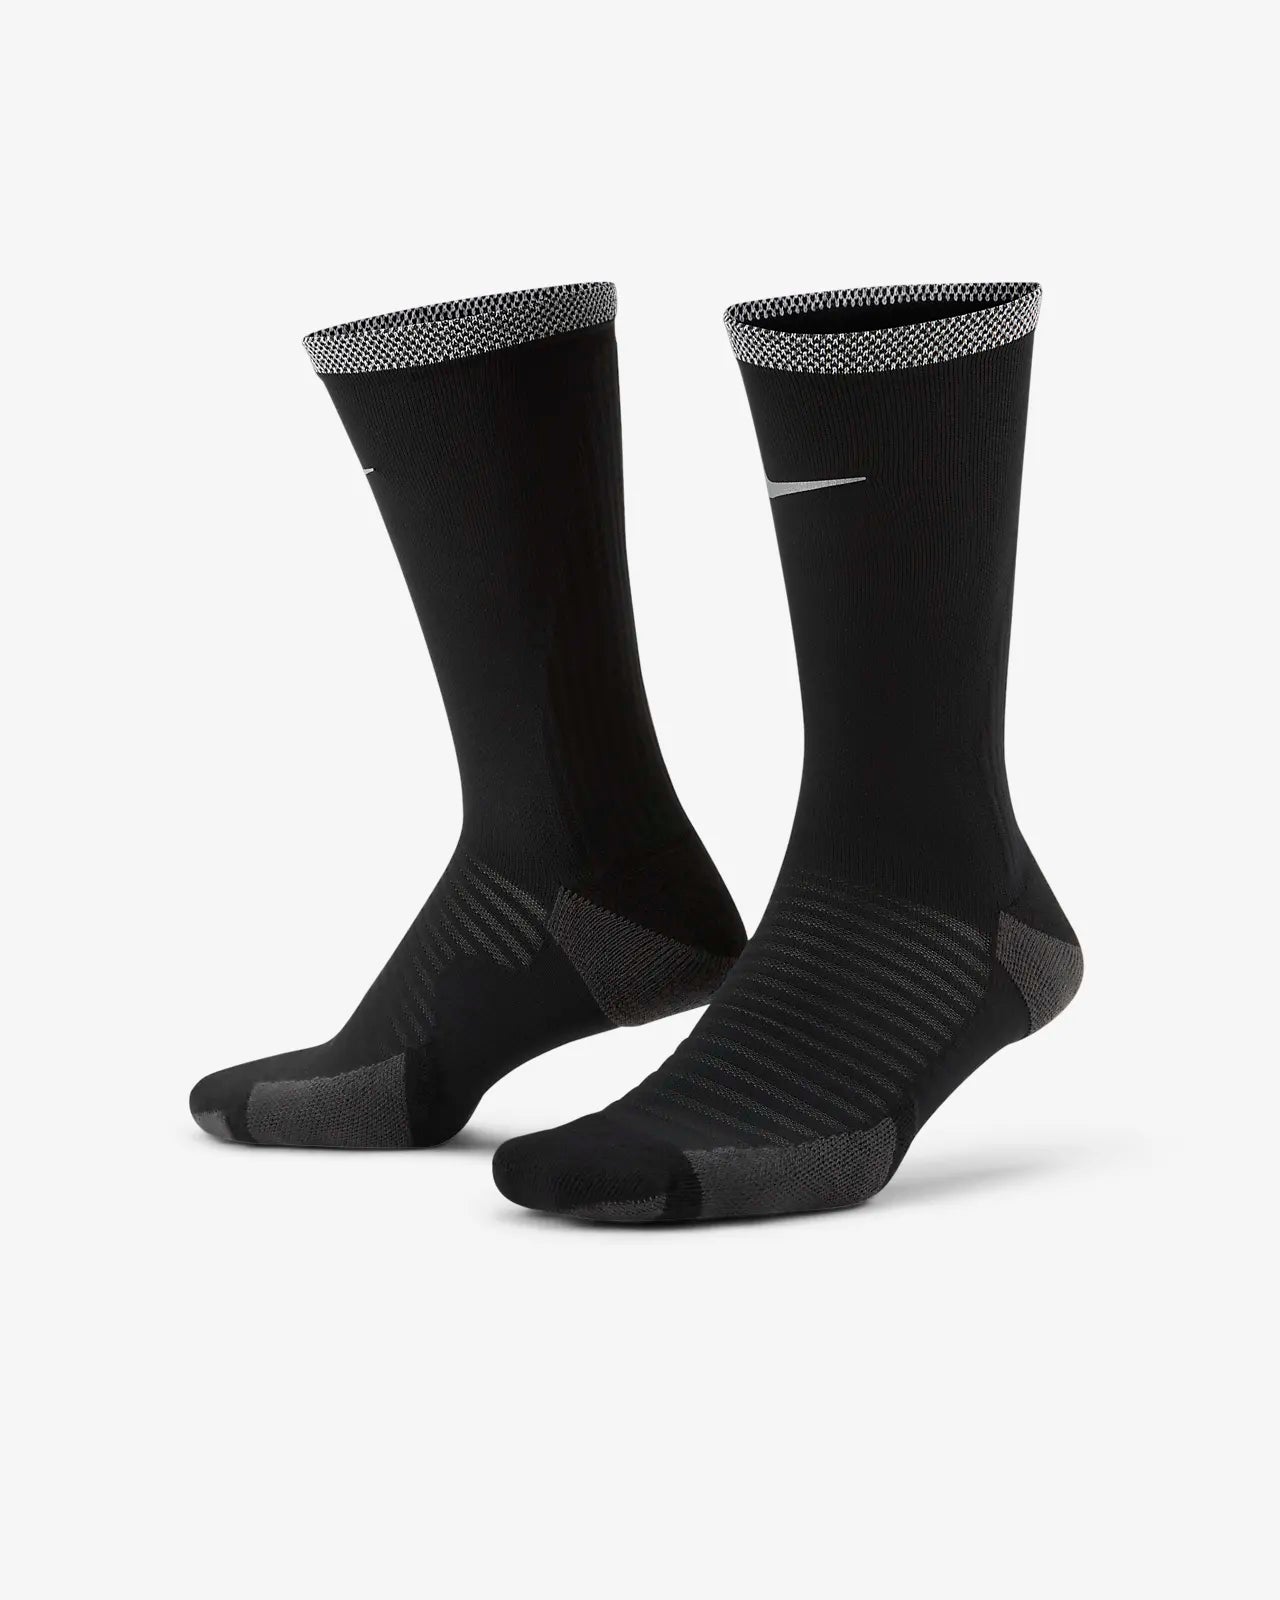 Nike Spark Cushioned Crew Sock – Laced.